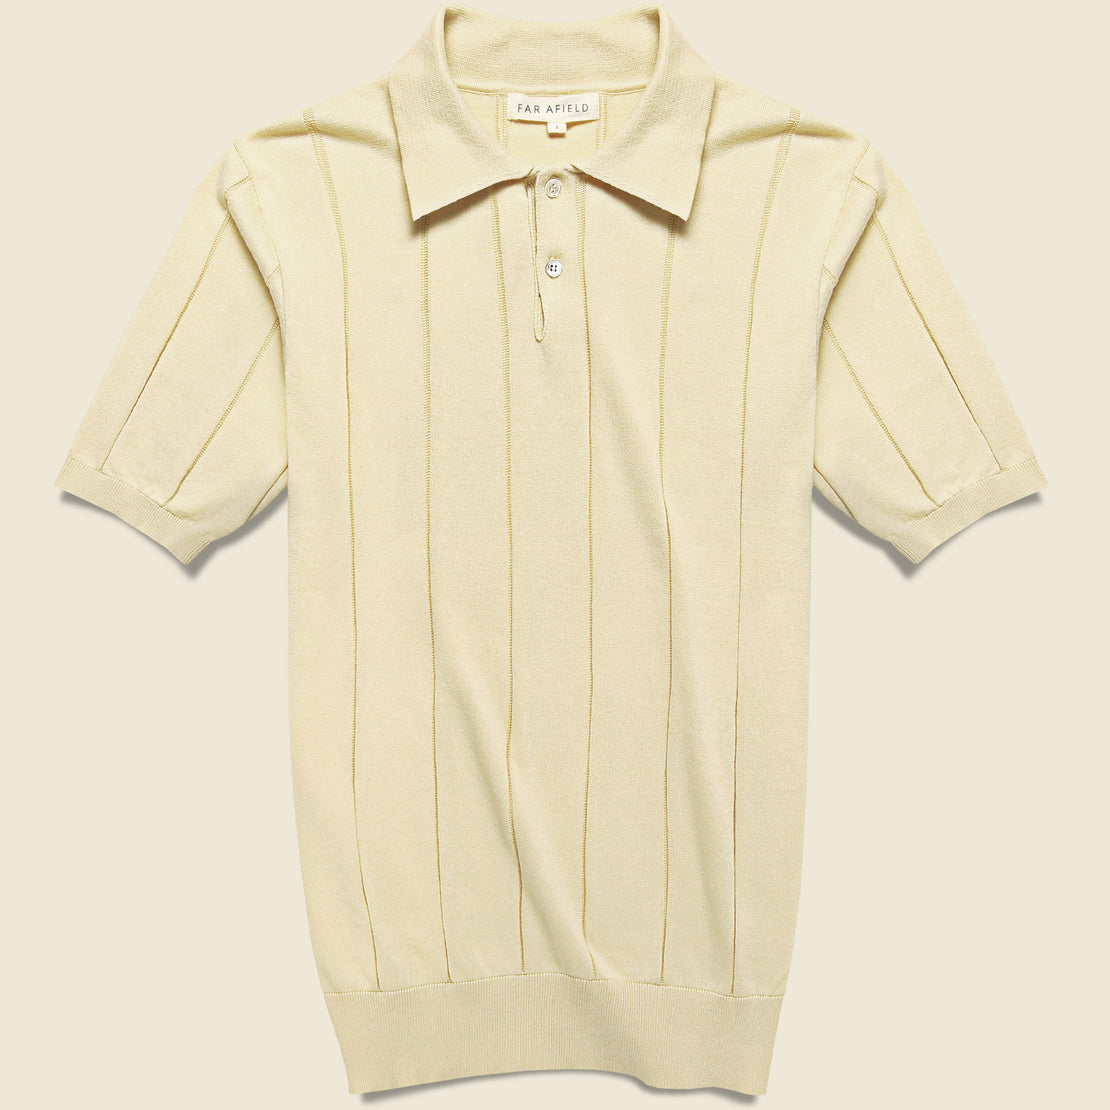 Far Afield Knit Jacobs Polo - Seed Pearl